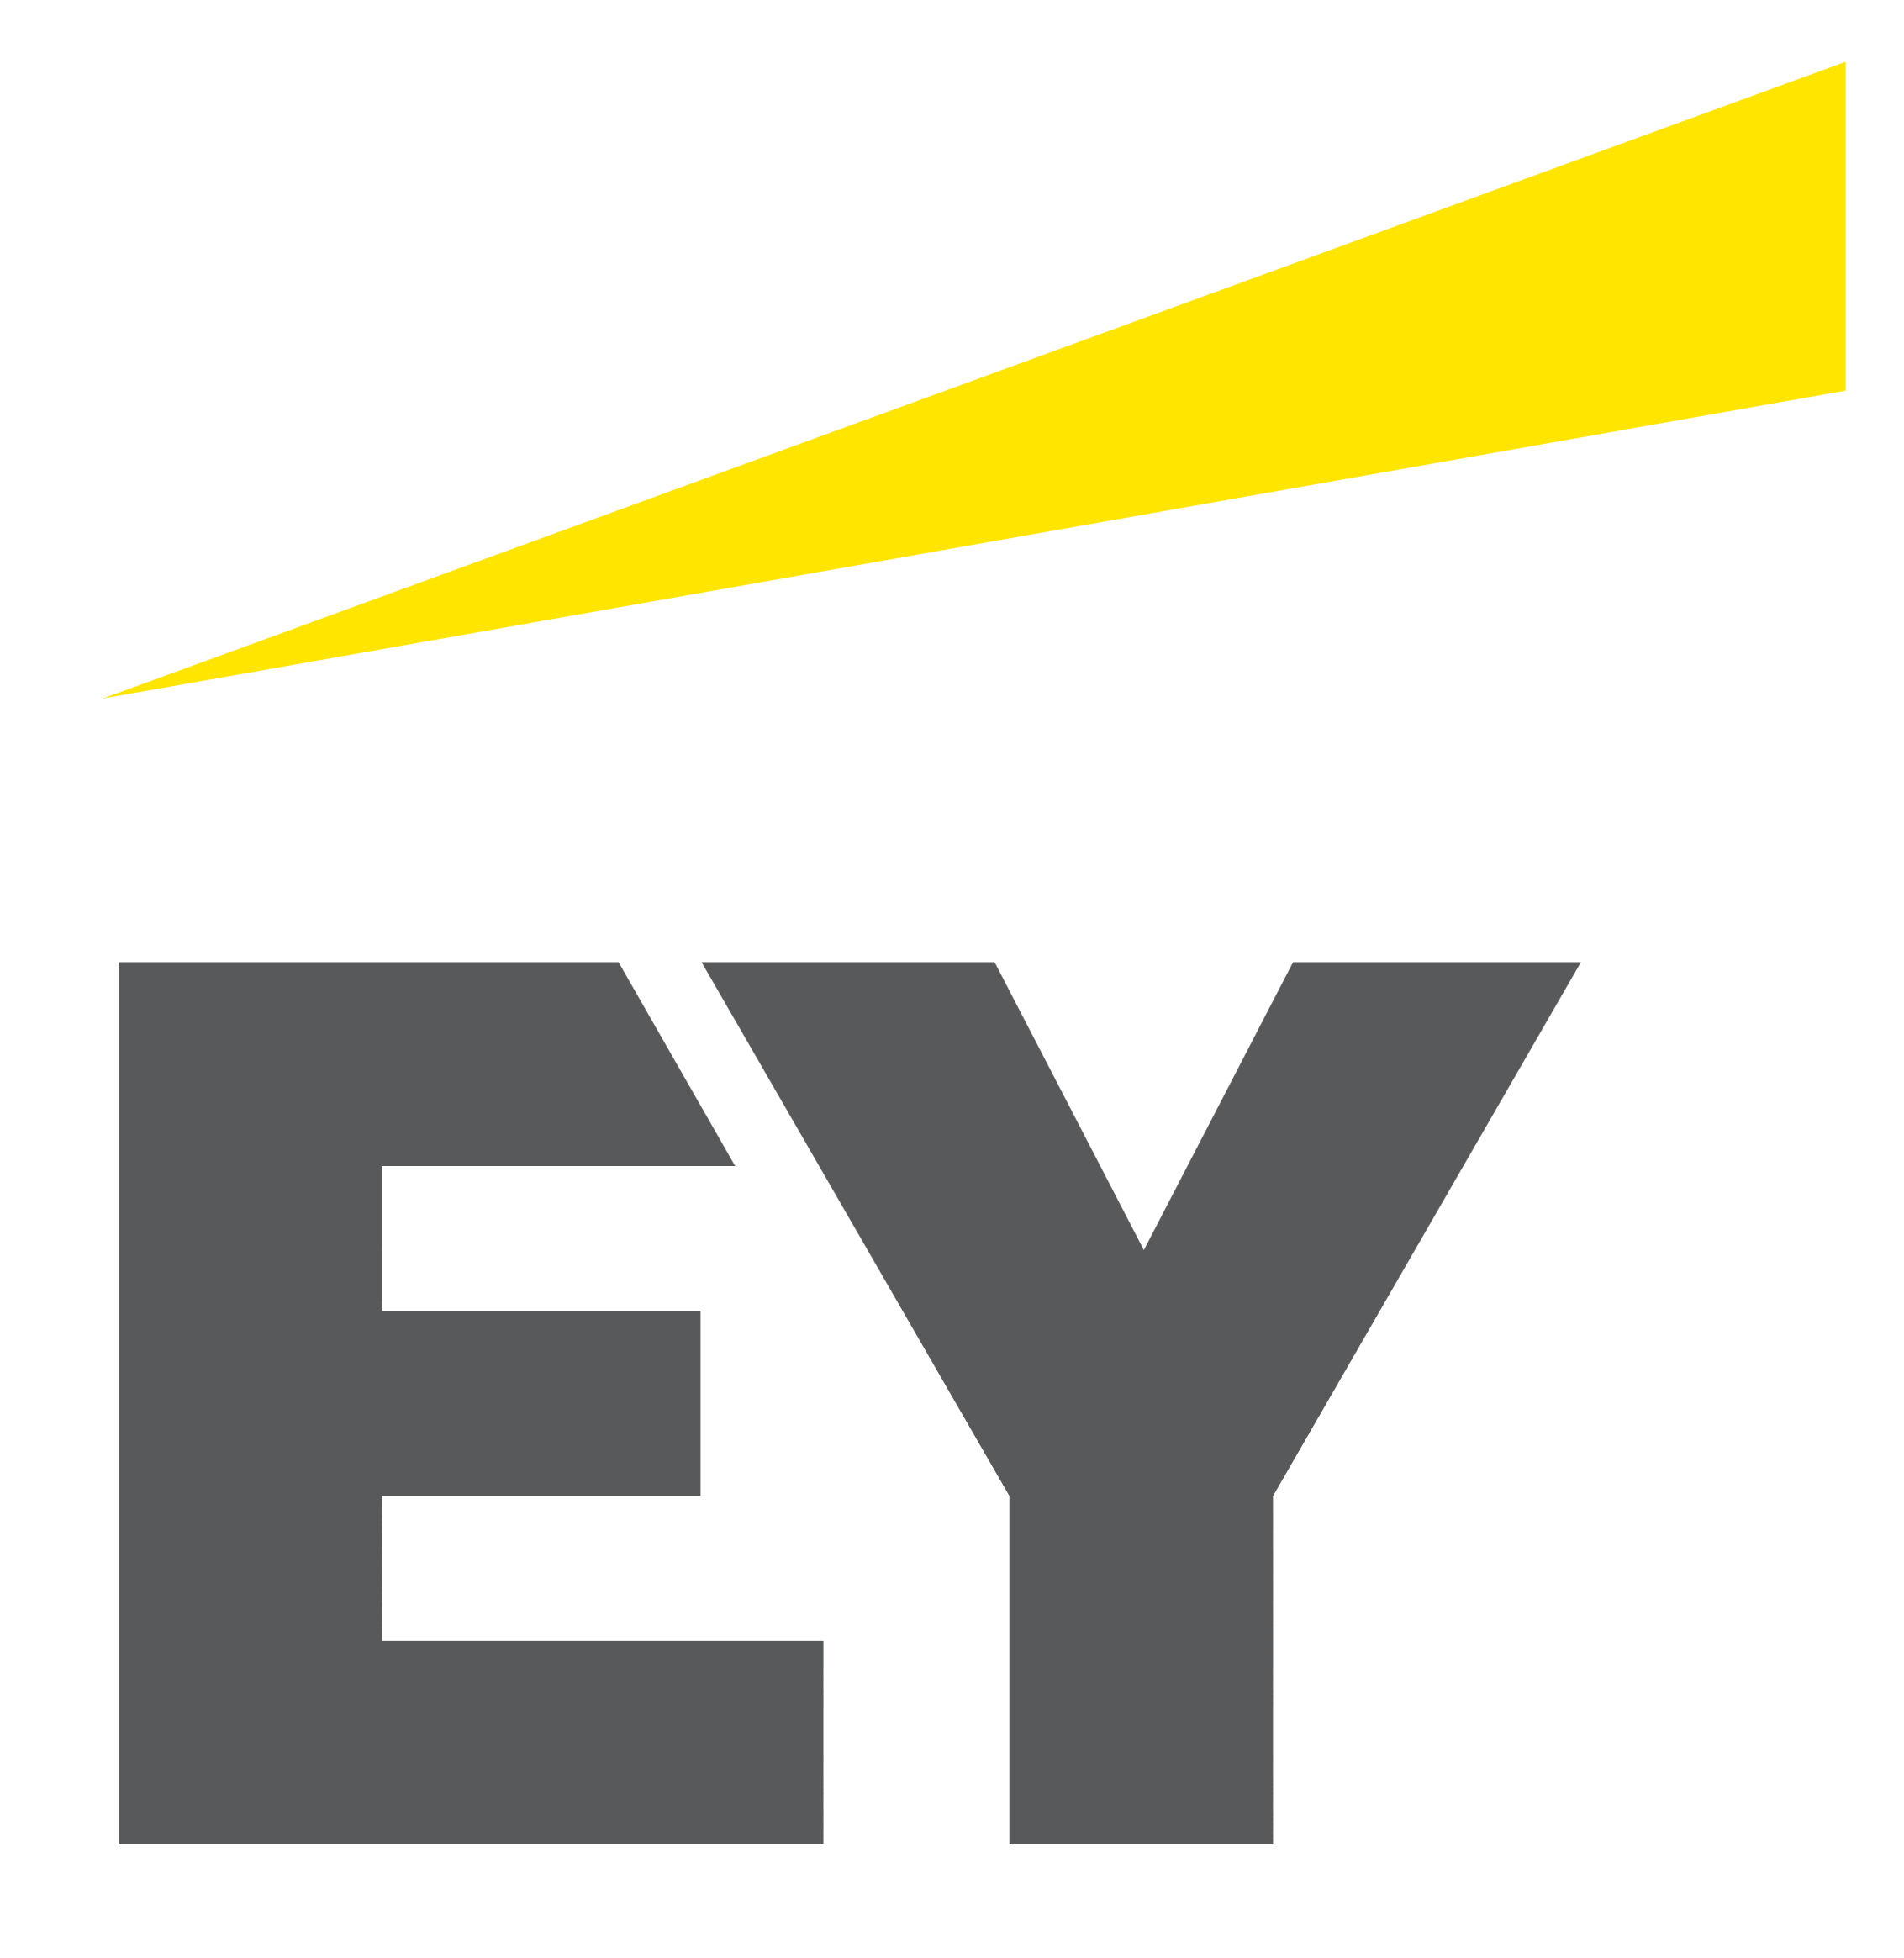 Ernst & Young 